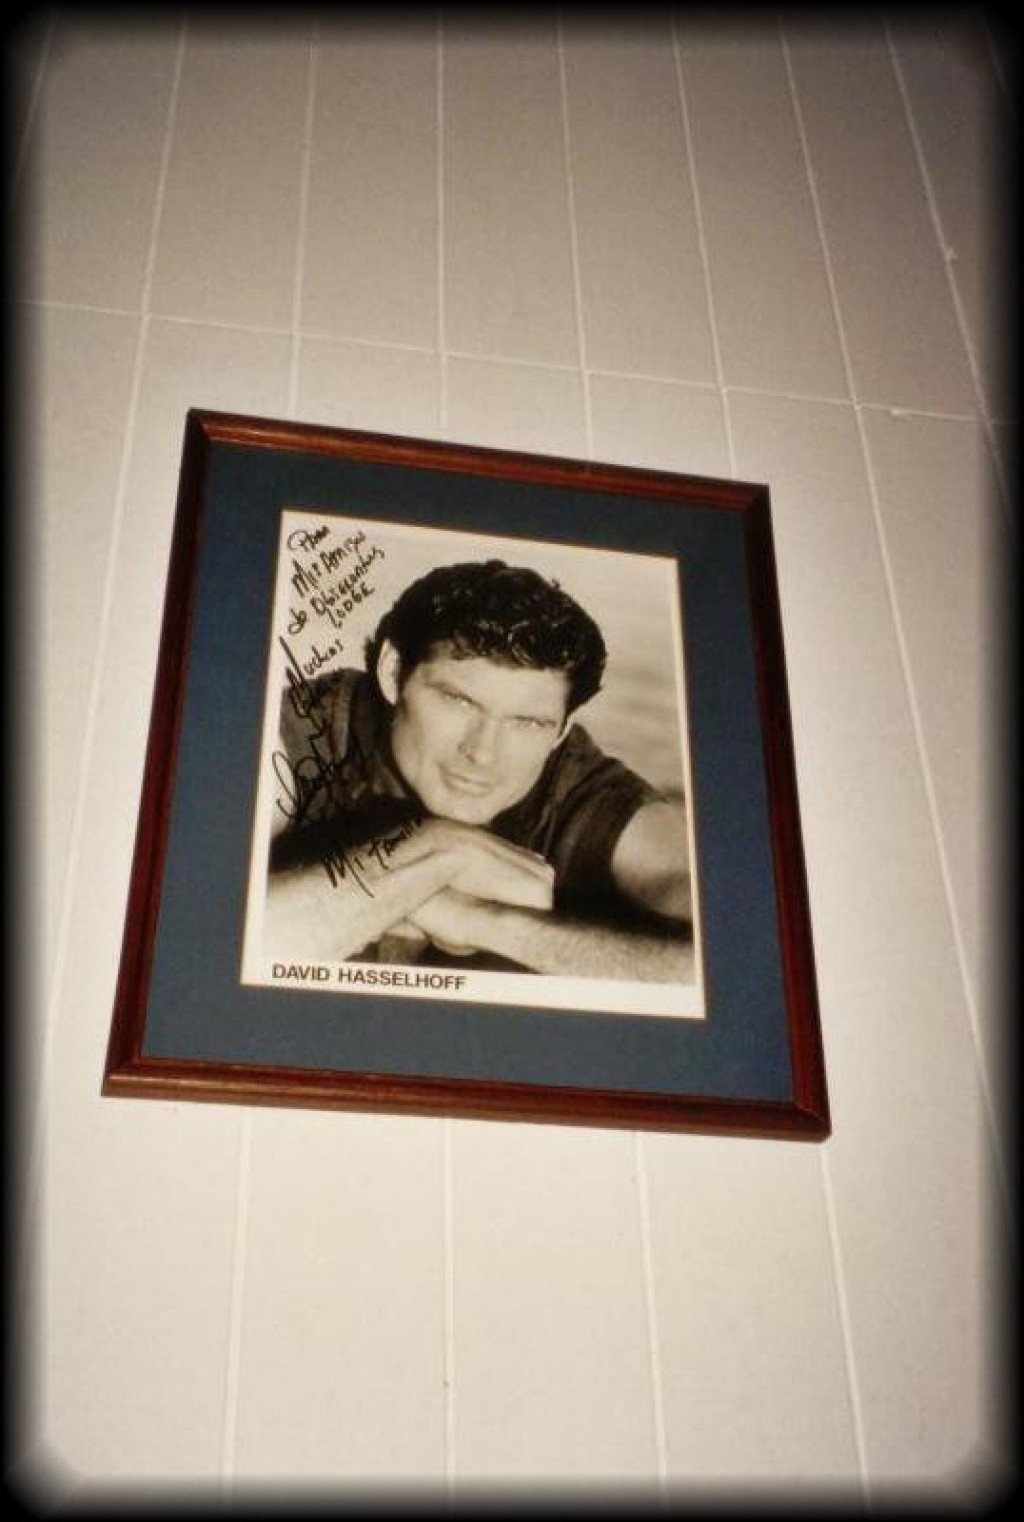 David Hasshelhoff, Mr. Knight Rider himself stayed here!!!  How cool is that?